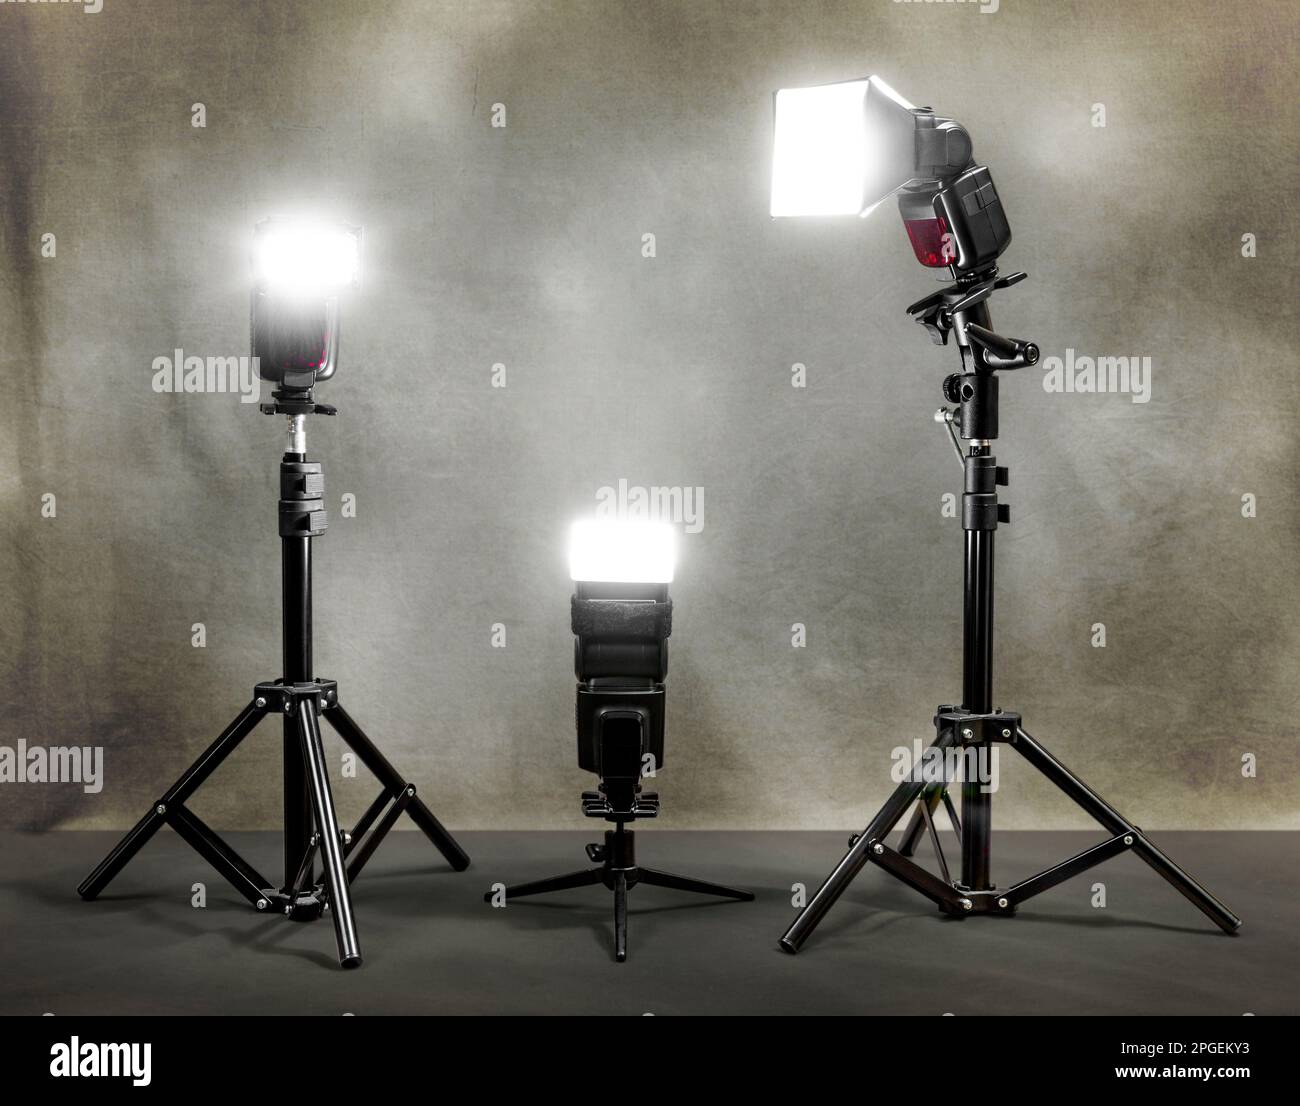 Horizontal shot of three radio-controlled photo strobes firing on a canvas background. Stock Photo